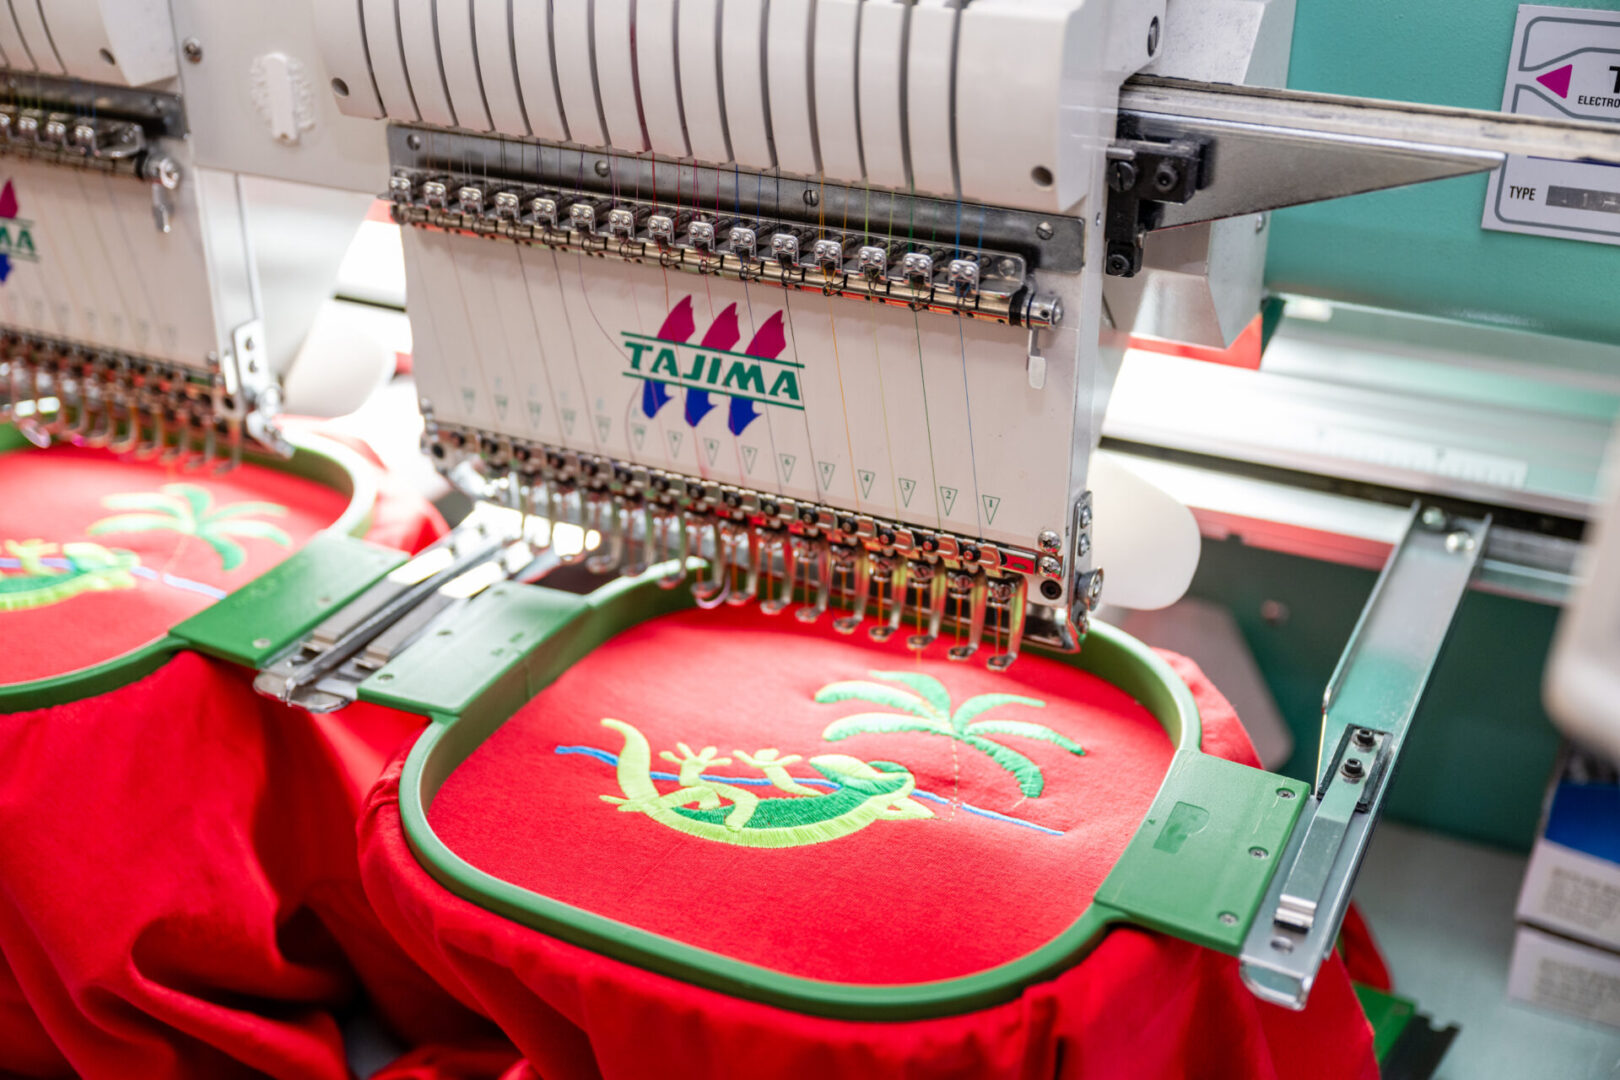 A machine is working on a red cloth.